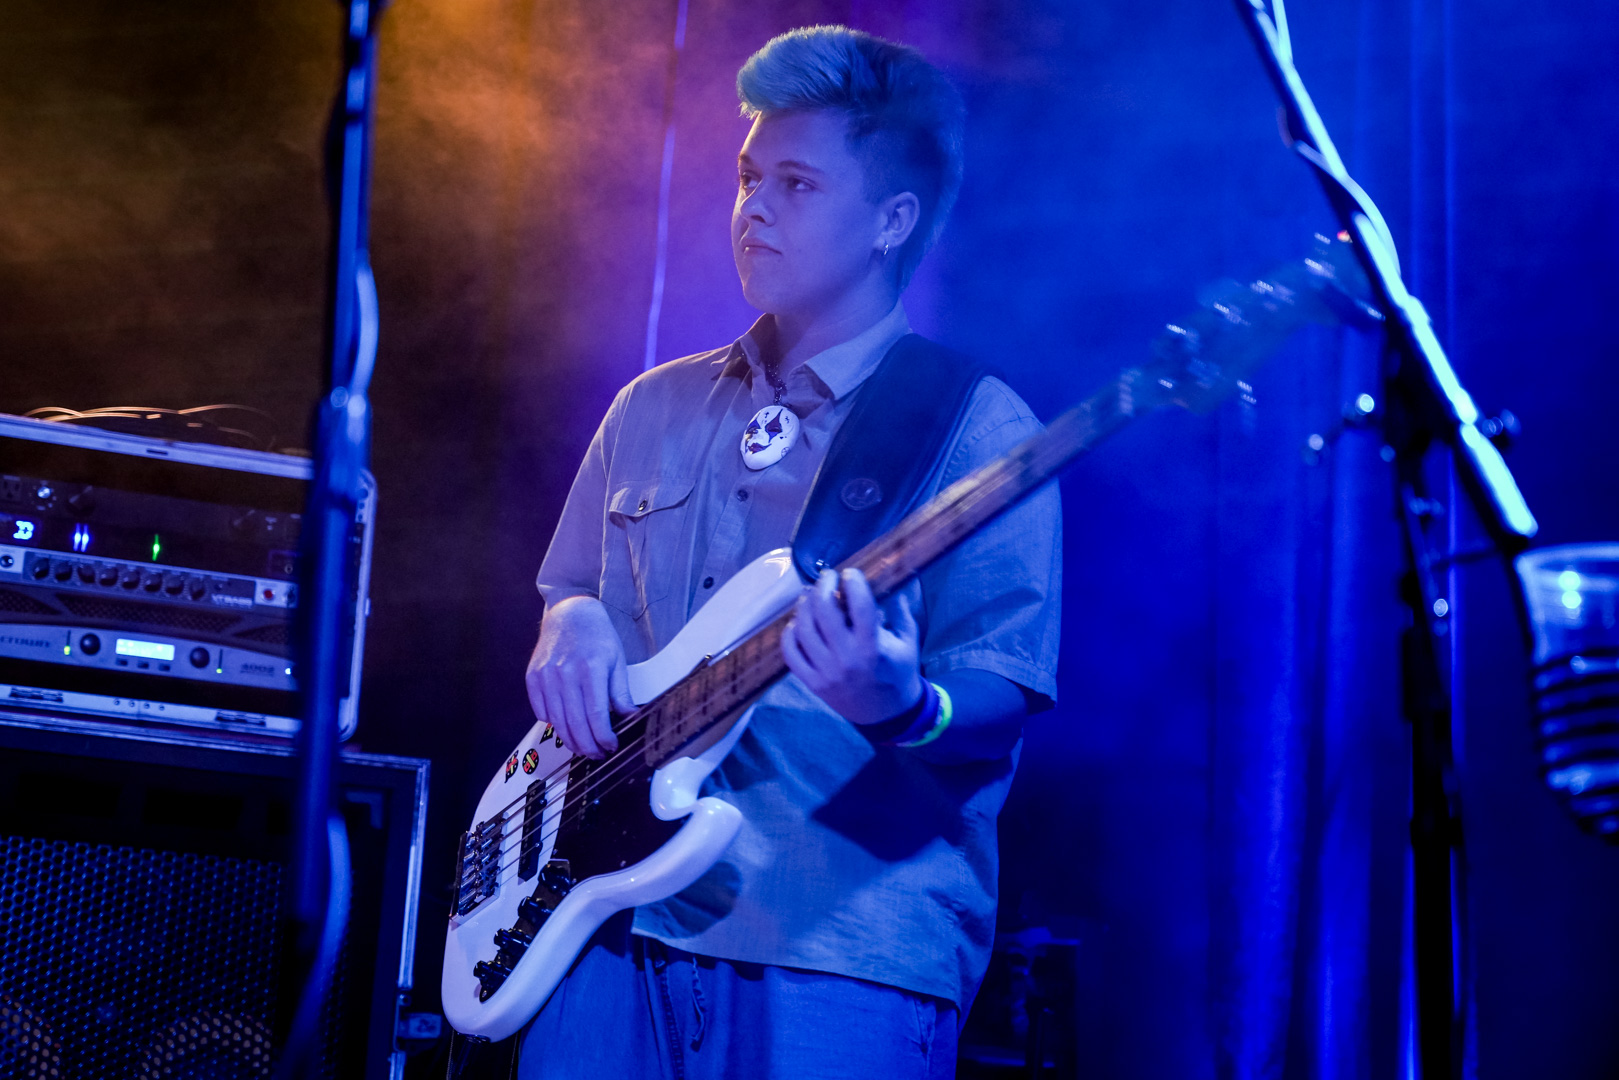 A young bass player on stage